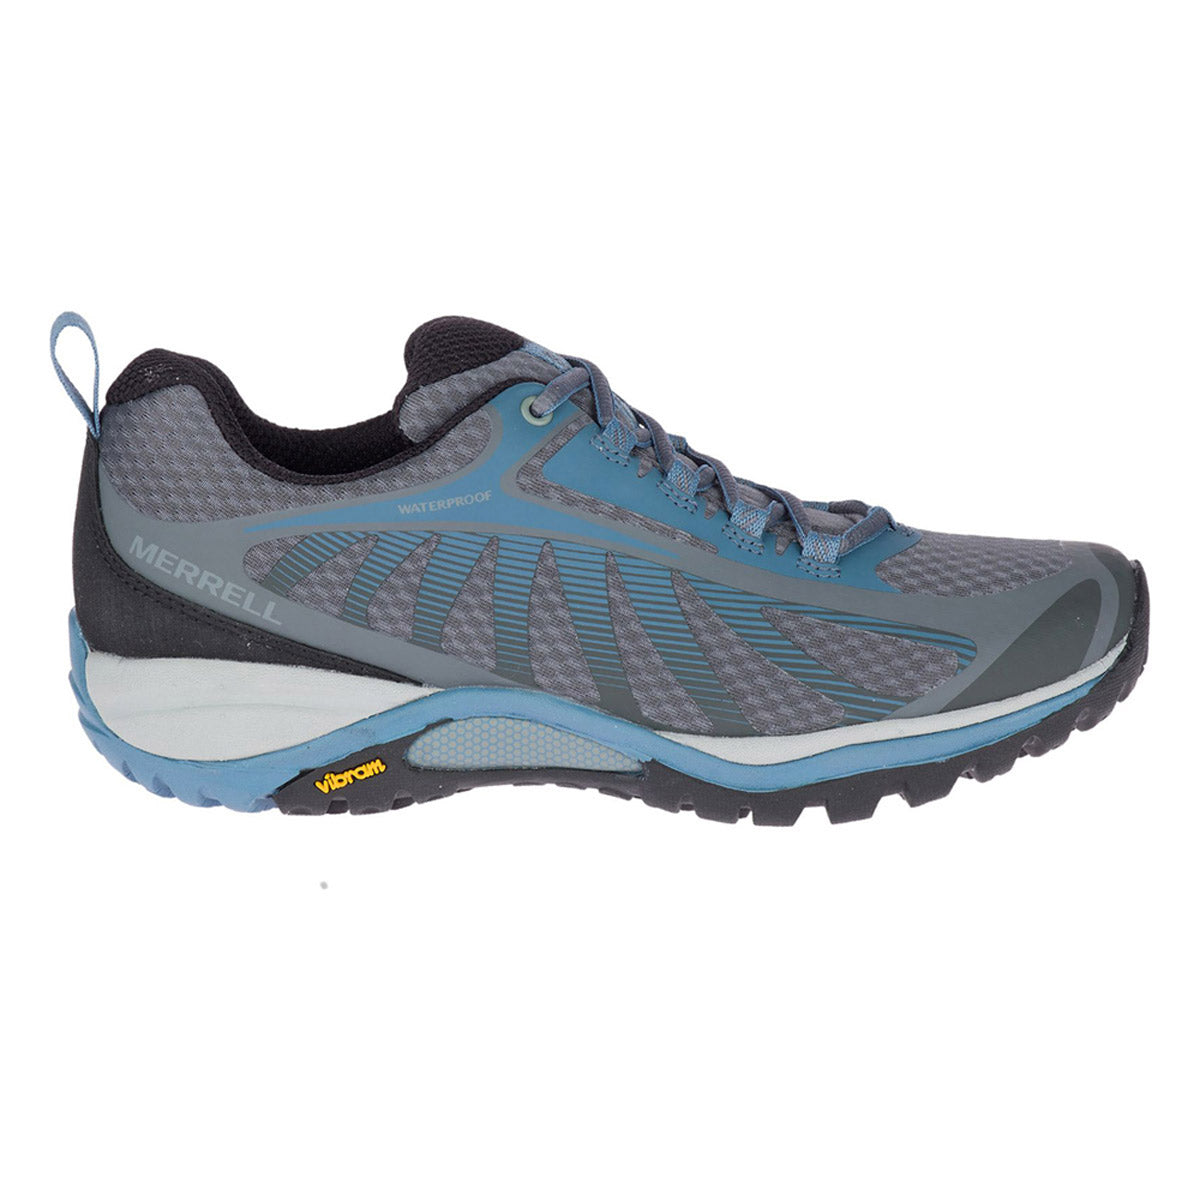 Gray and blue Merrell Siren Edge 3 waterproof hiking shoe on a white background.